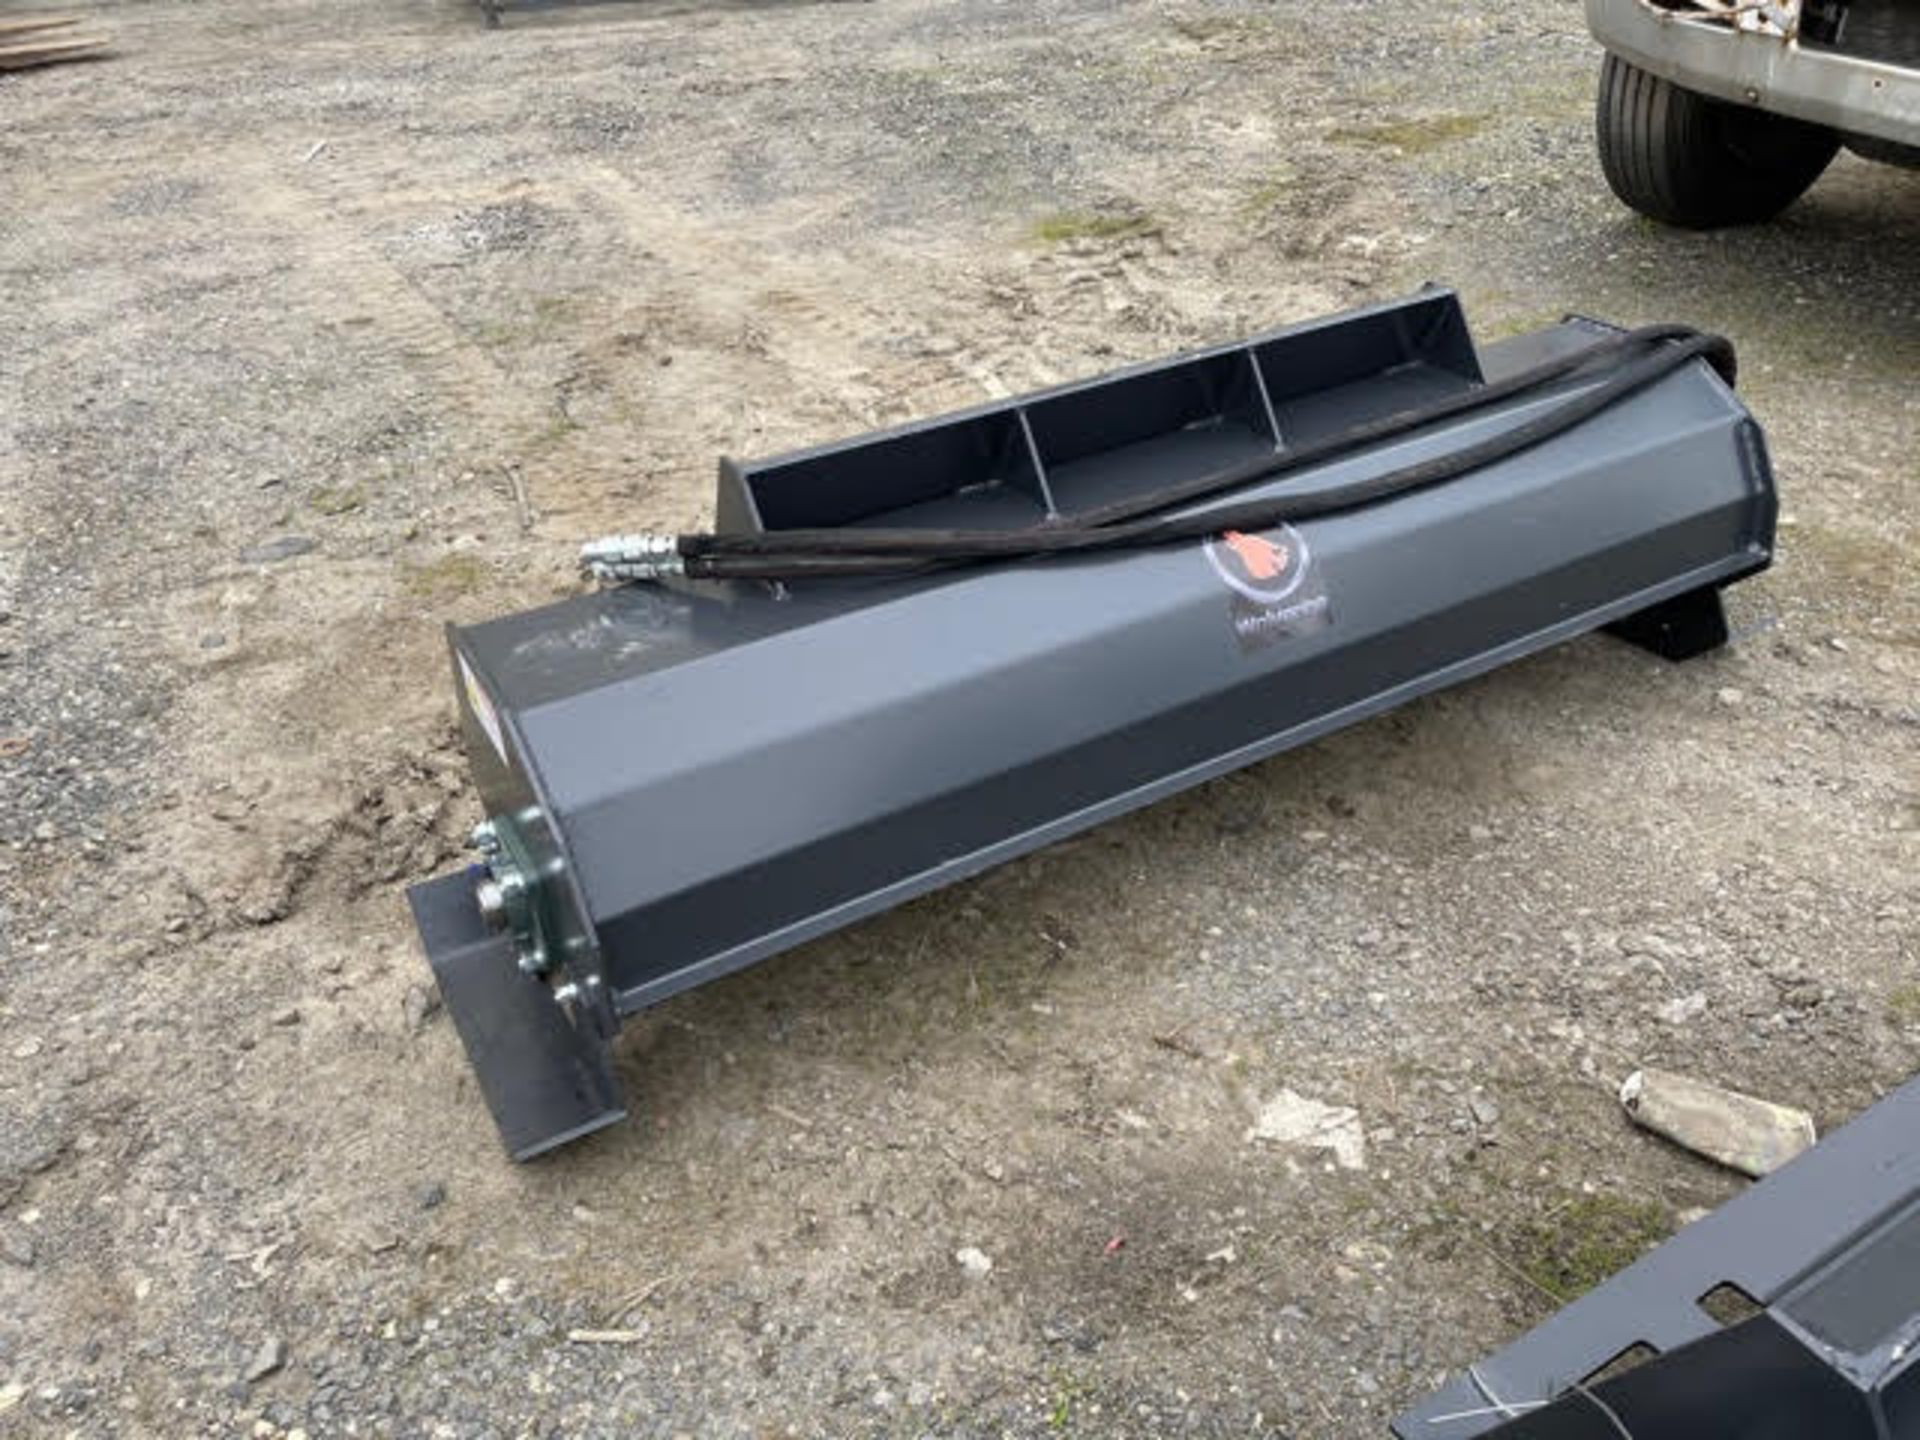 New Wolverine Skid Steer Auger Rotary Tiller (a)- Located in Lester, PA - Image 2 of 5